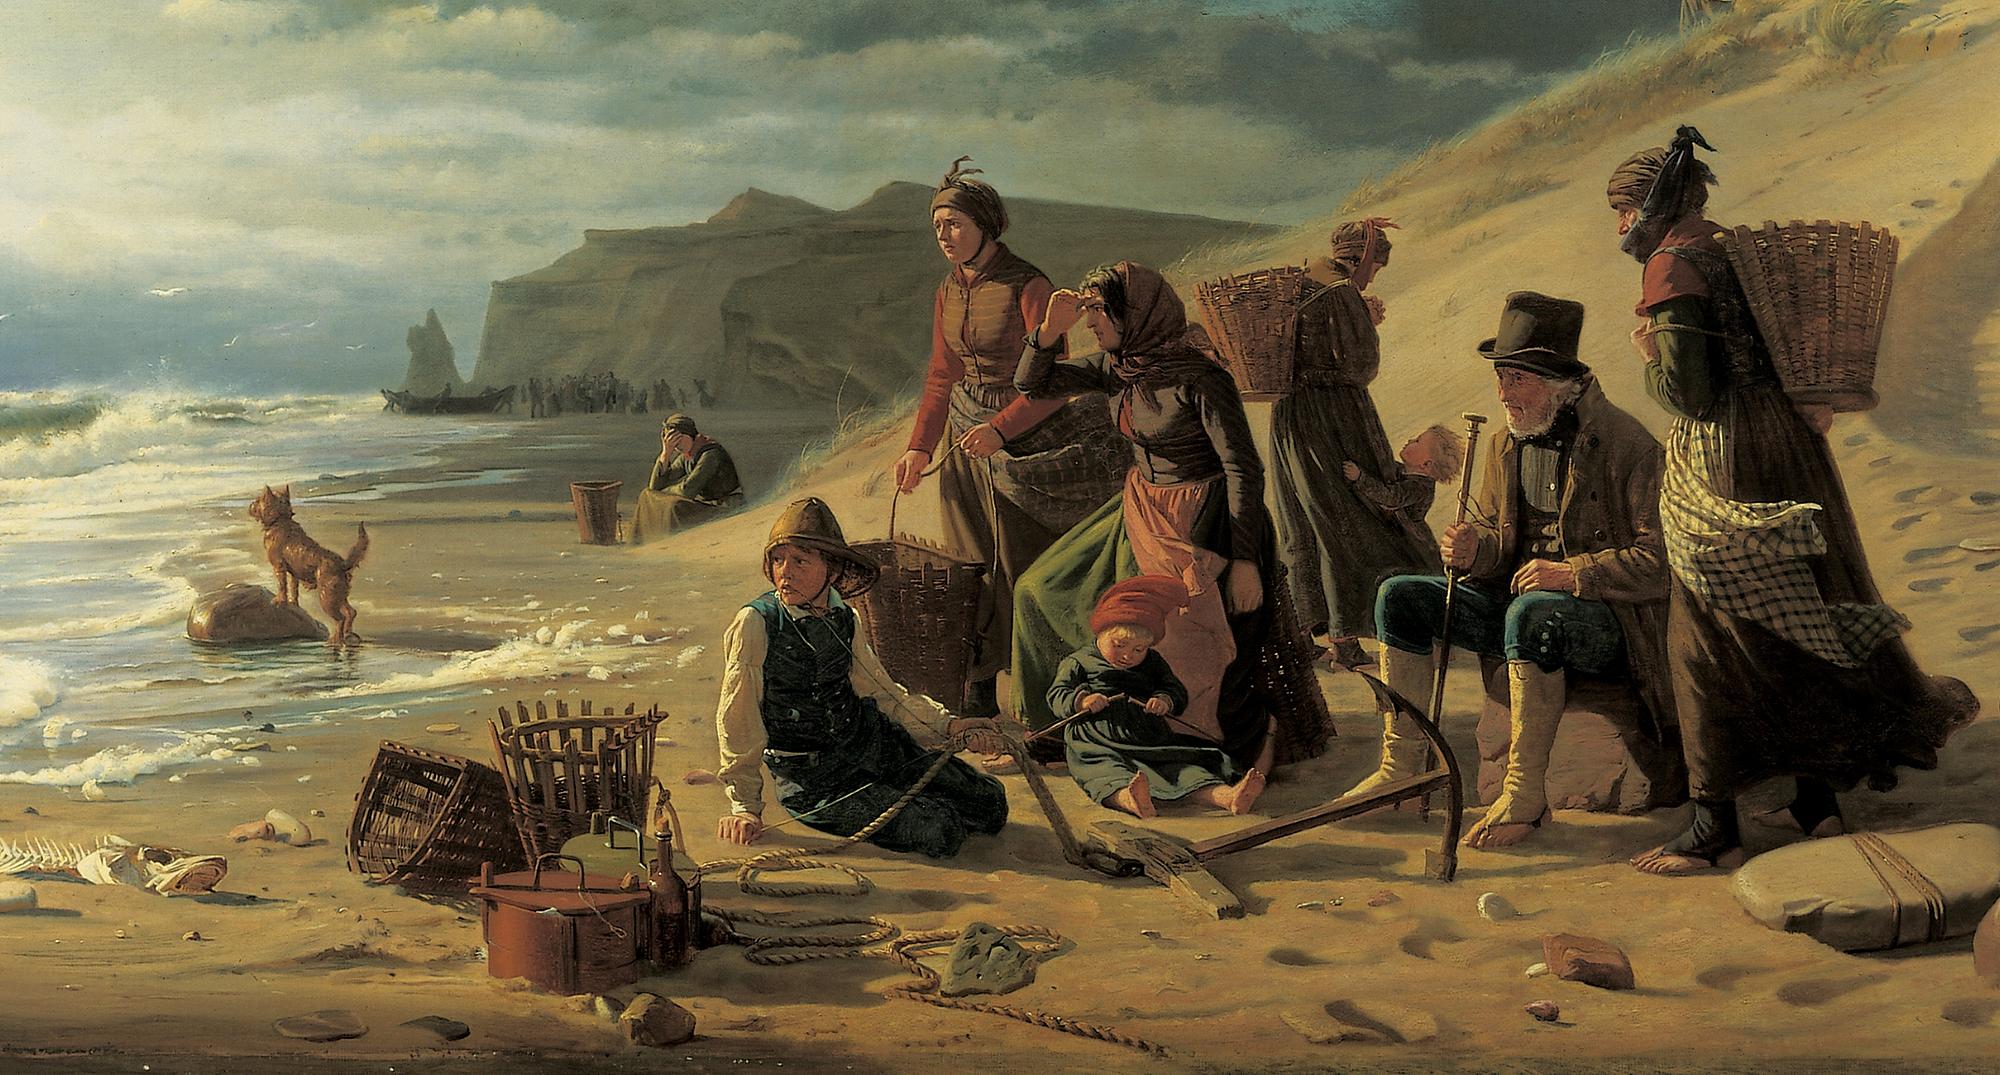 Carl Bloch: 'Fishermen's families awaiting their return in an approaching storm. From the west coast of Jutland', 1858
